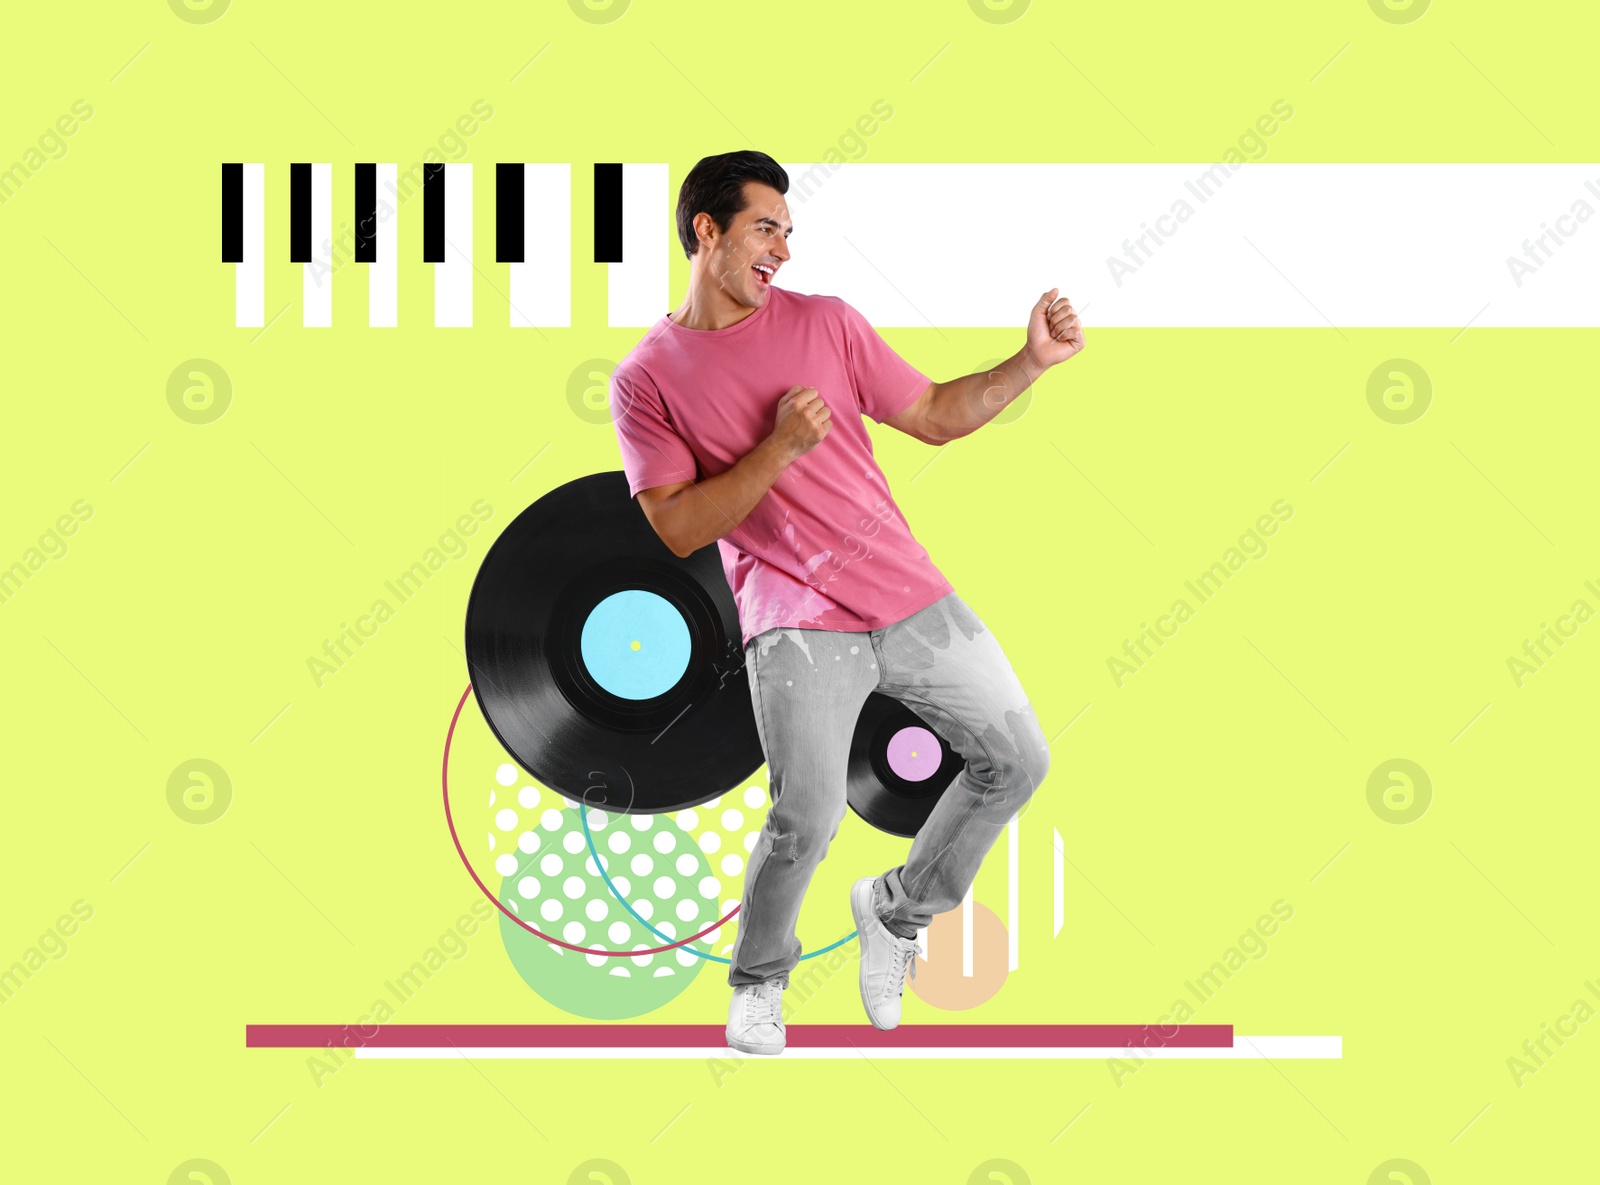 Image of Handsome young man dancing on yellowish green background. Bright creative design